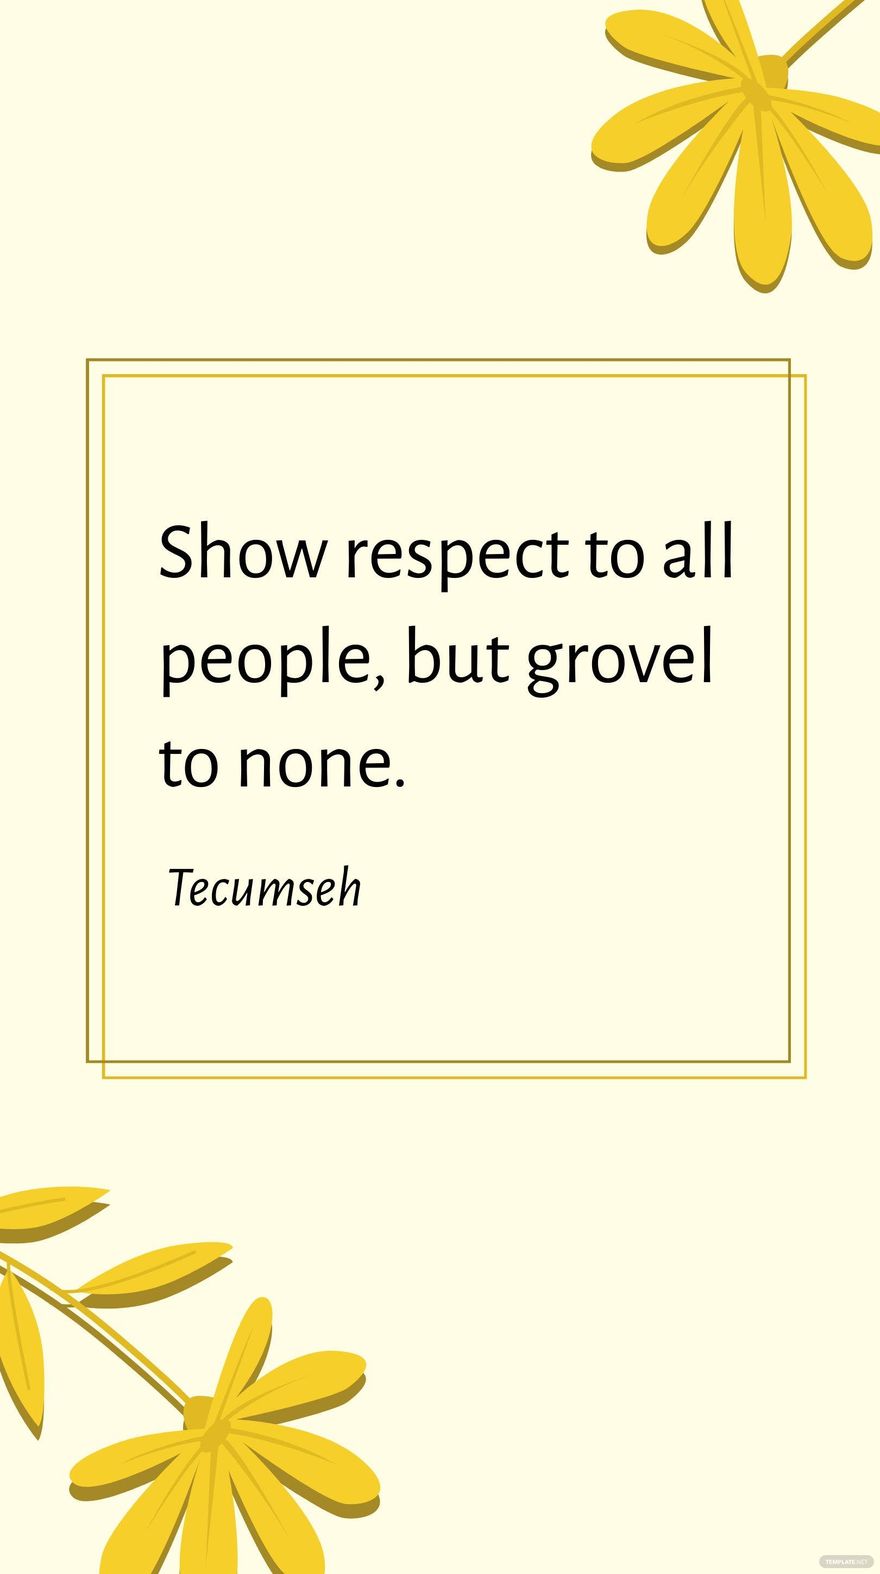 Tecumseh - Show respect to all people, but grovel to none.